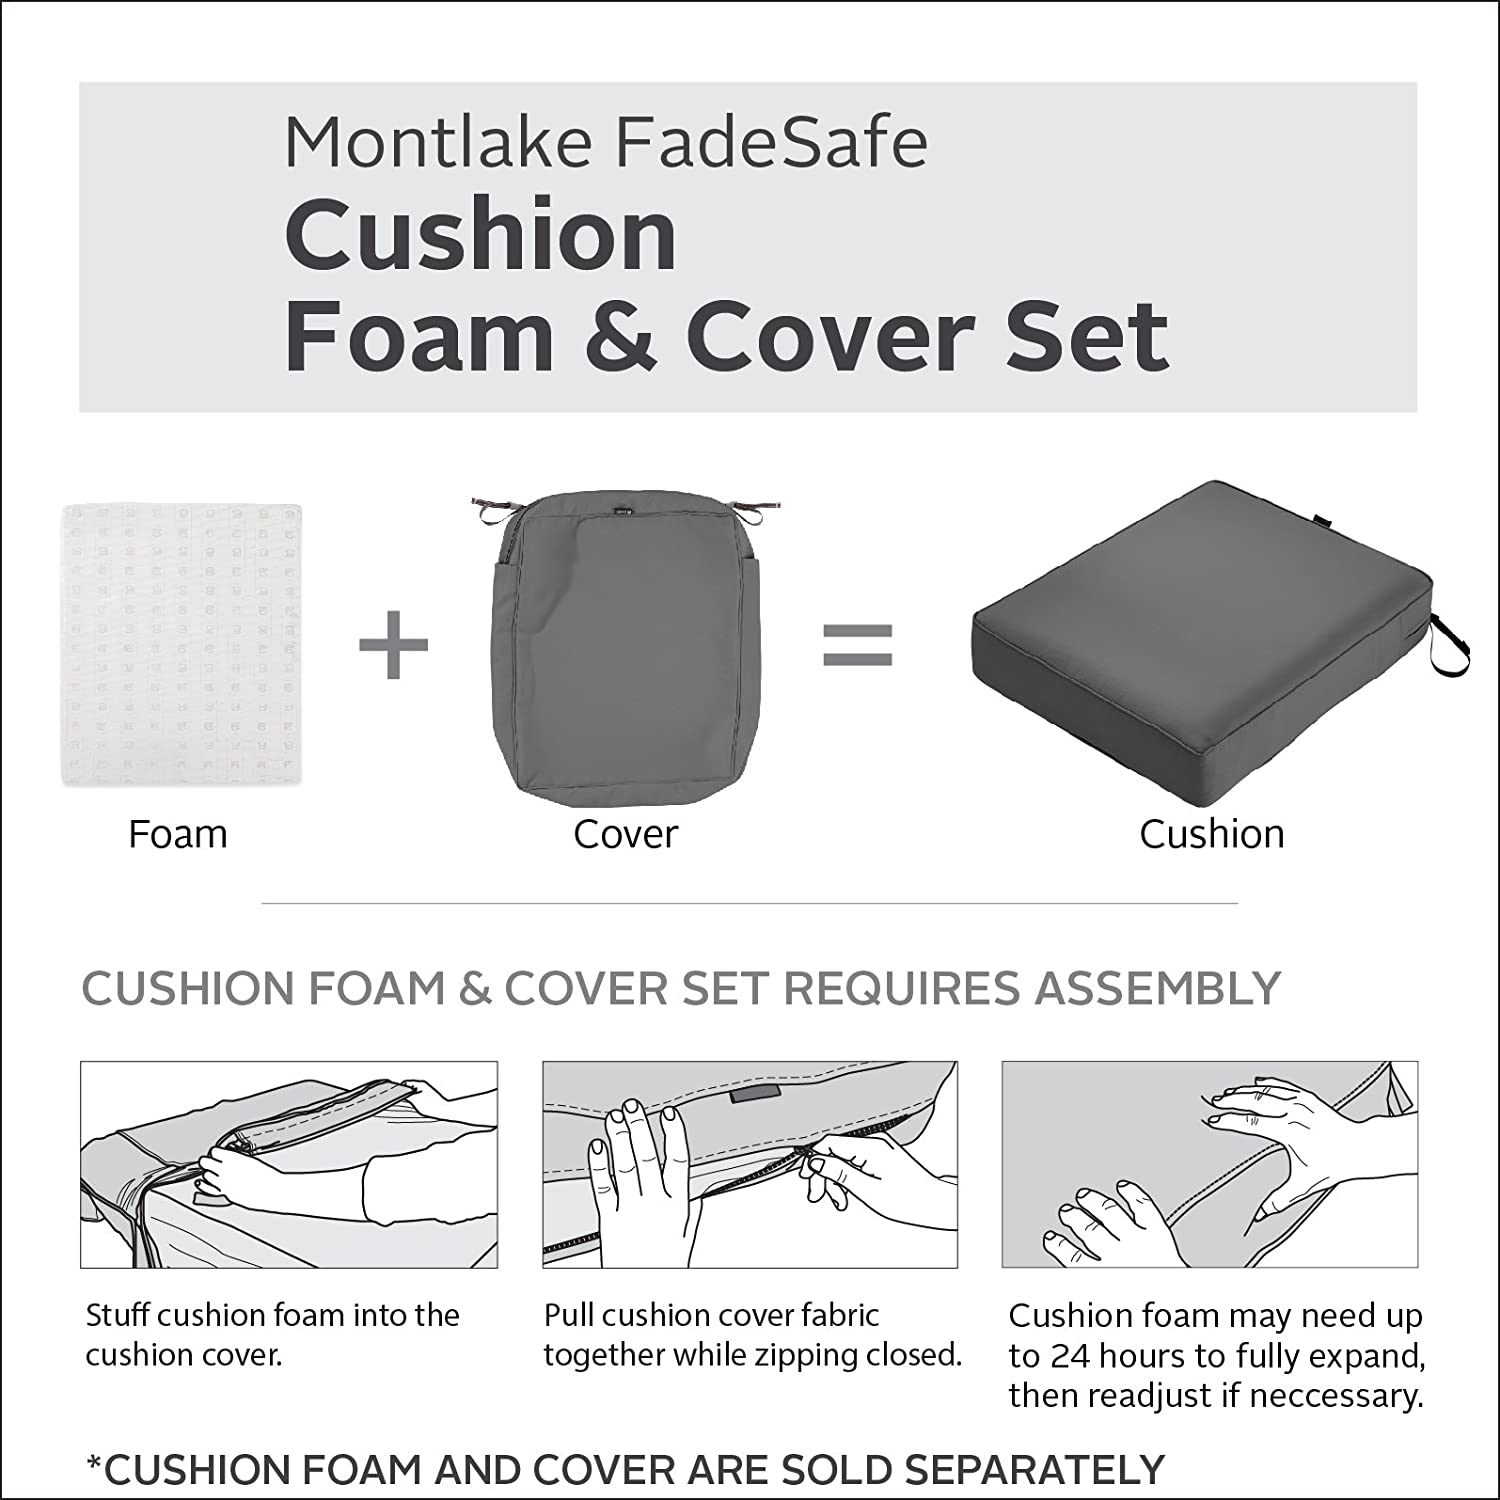 Classic Accessories Montlake Water-Resistant 23 x 25 x 5 Inch Rectangle Outdoor Seat Cushion Slip Cover, Patio Furniture Chair Cushion Cover, Light Charcoal Grey